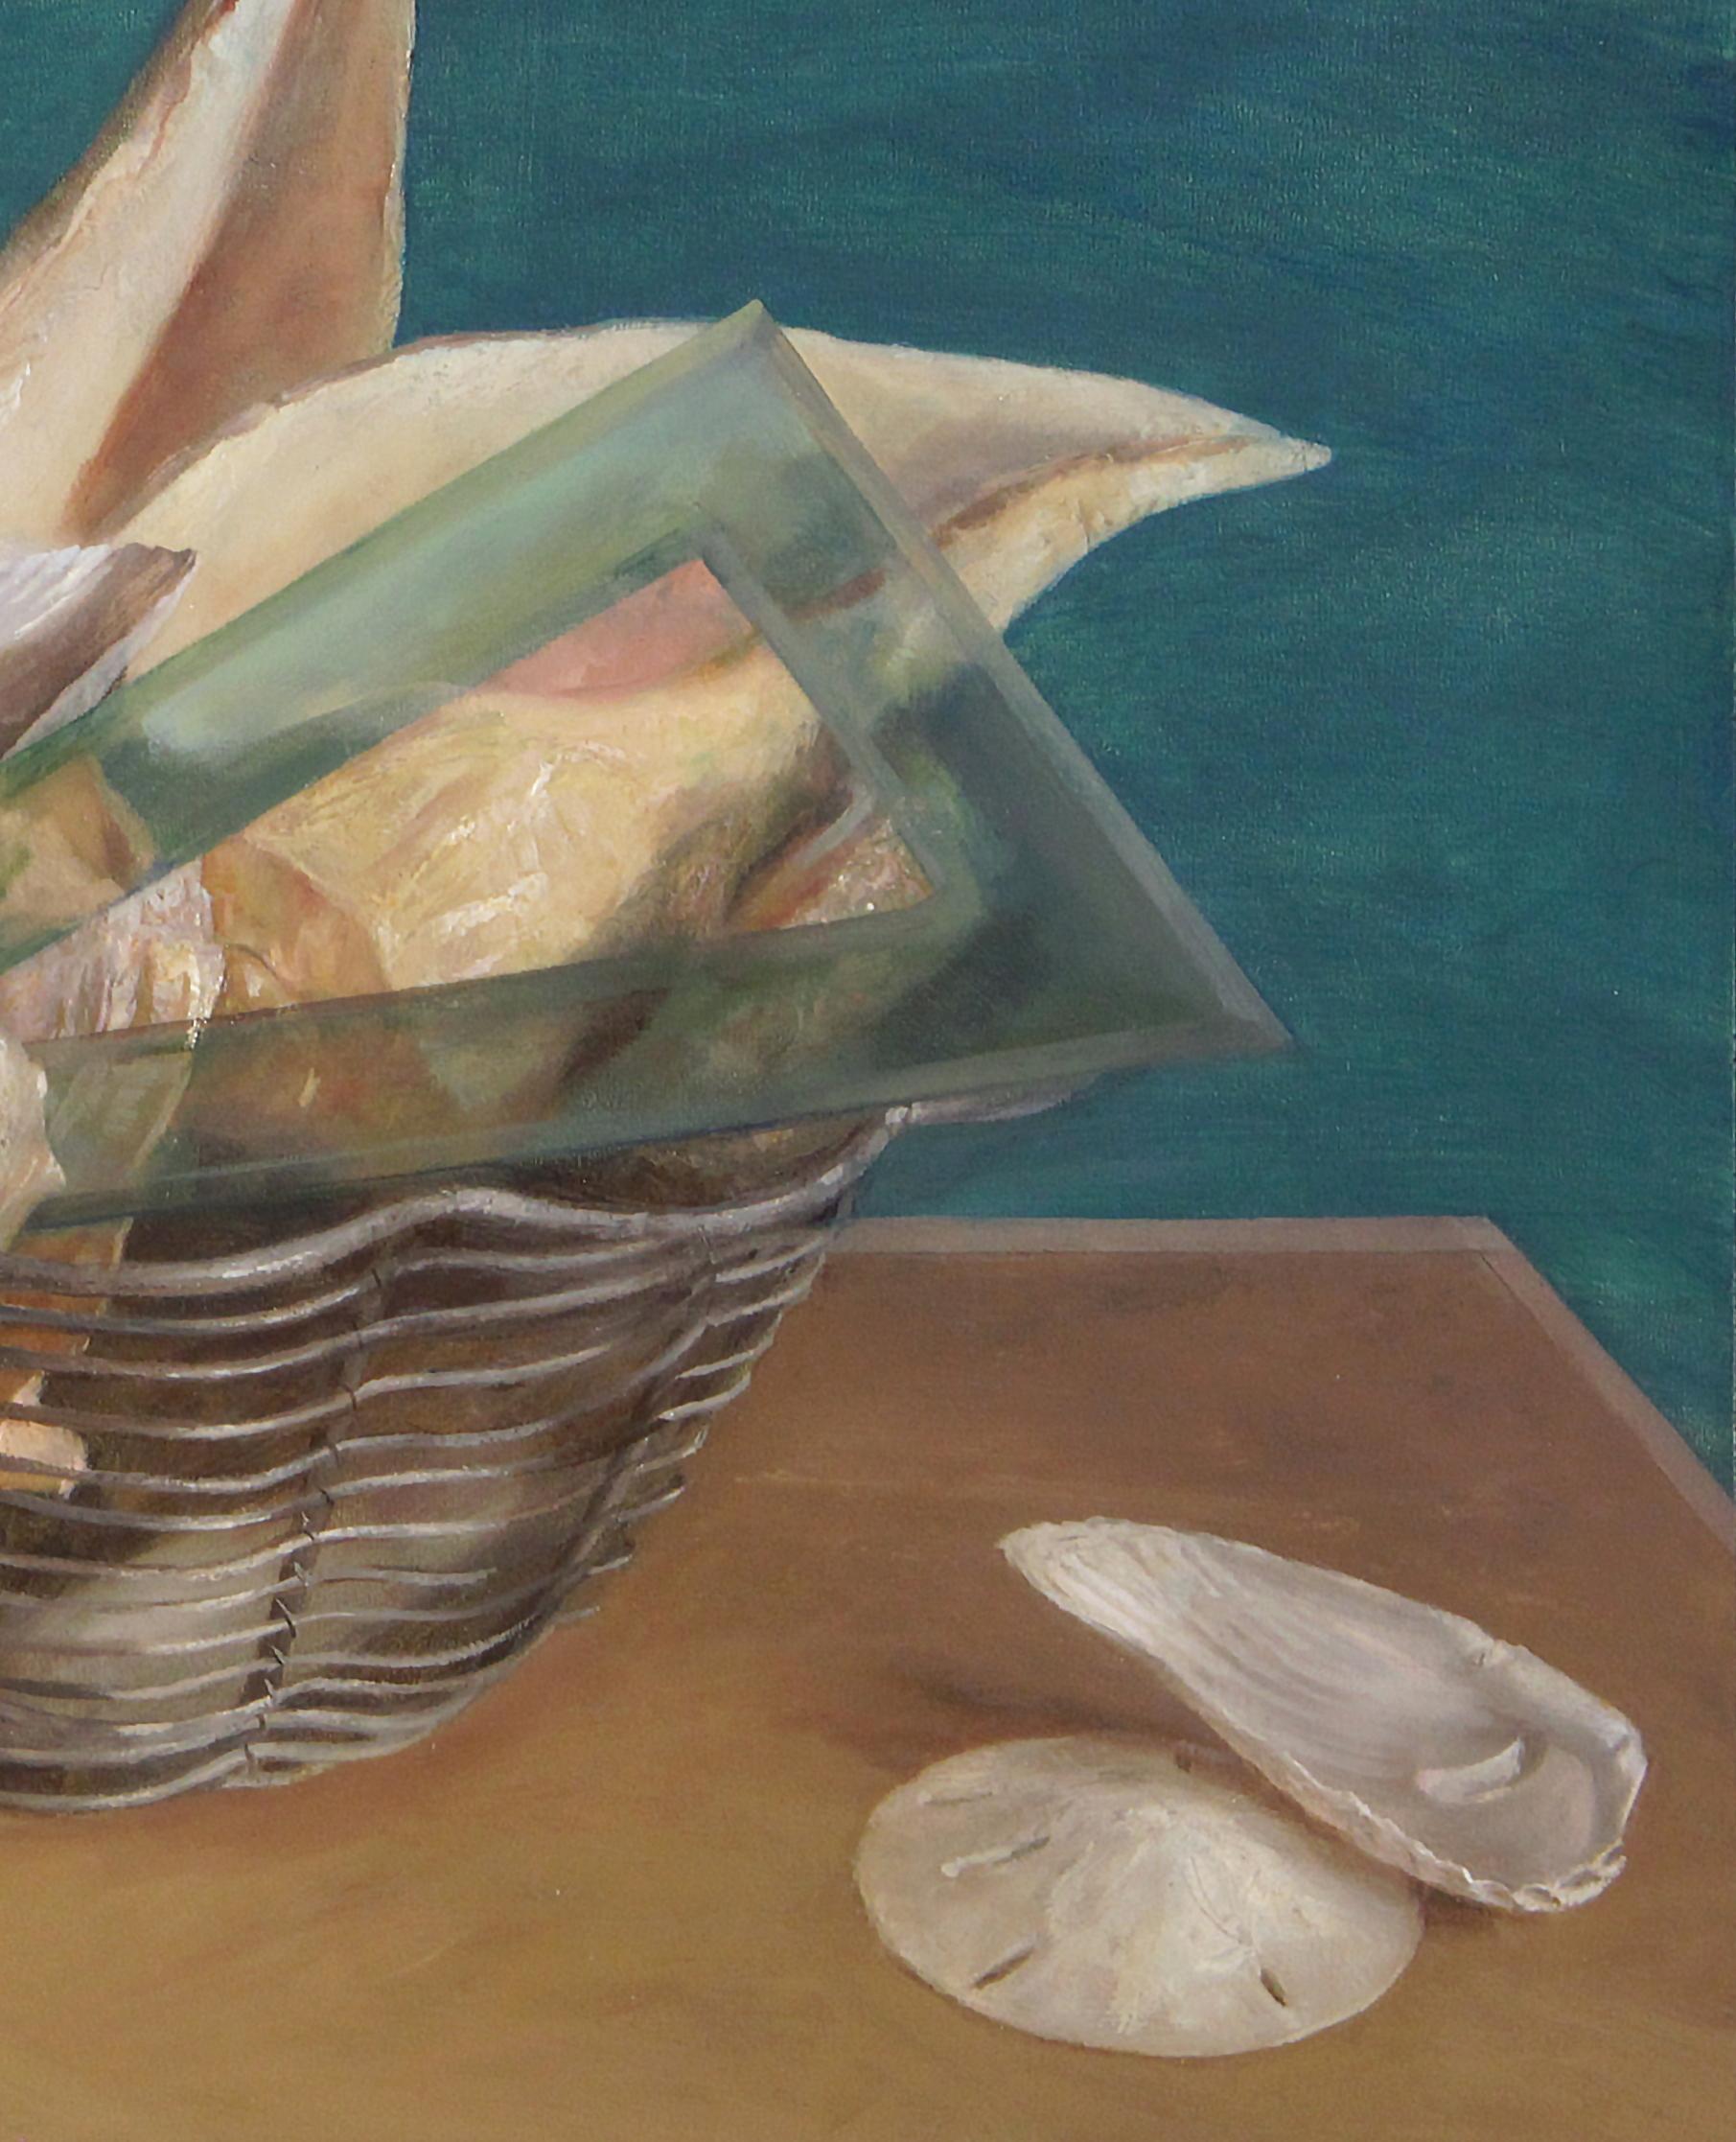 A silver wired basket holds several large seashells as well as various architectural tools. The varied textures, shapes and colors of the objects are rendered with careful detail, from the pale pink pearled interior of the conch shell to the